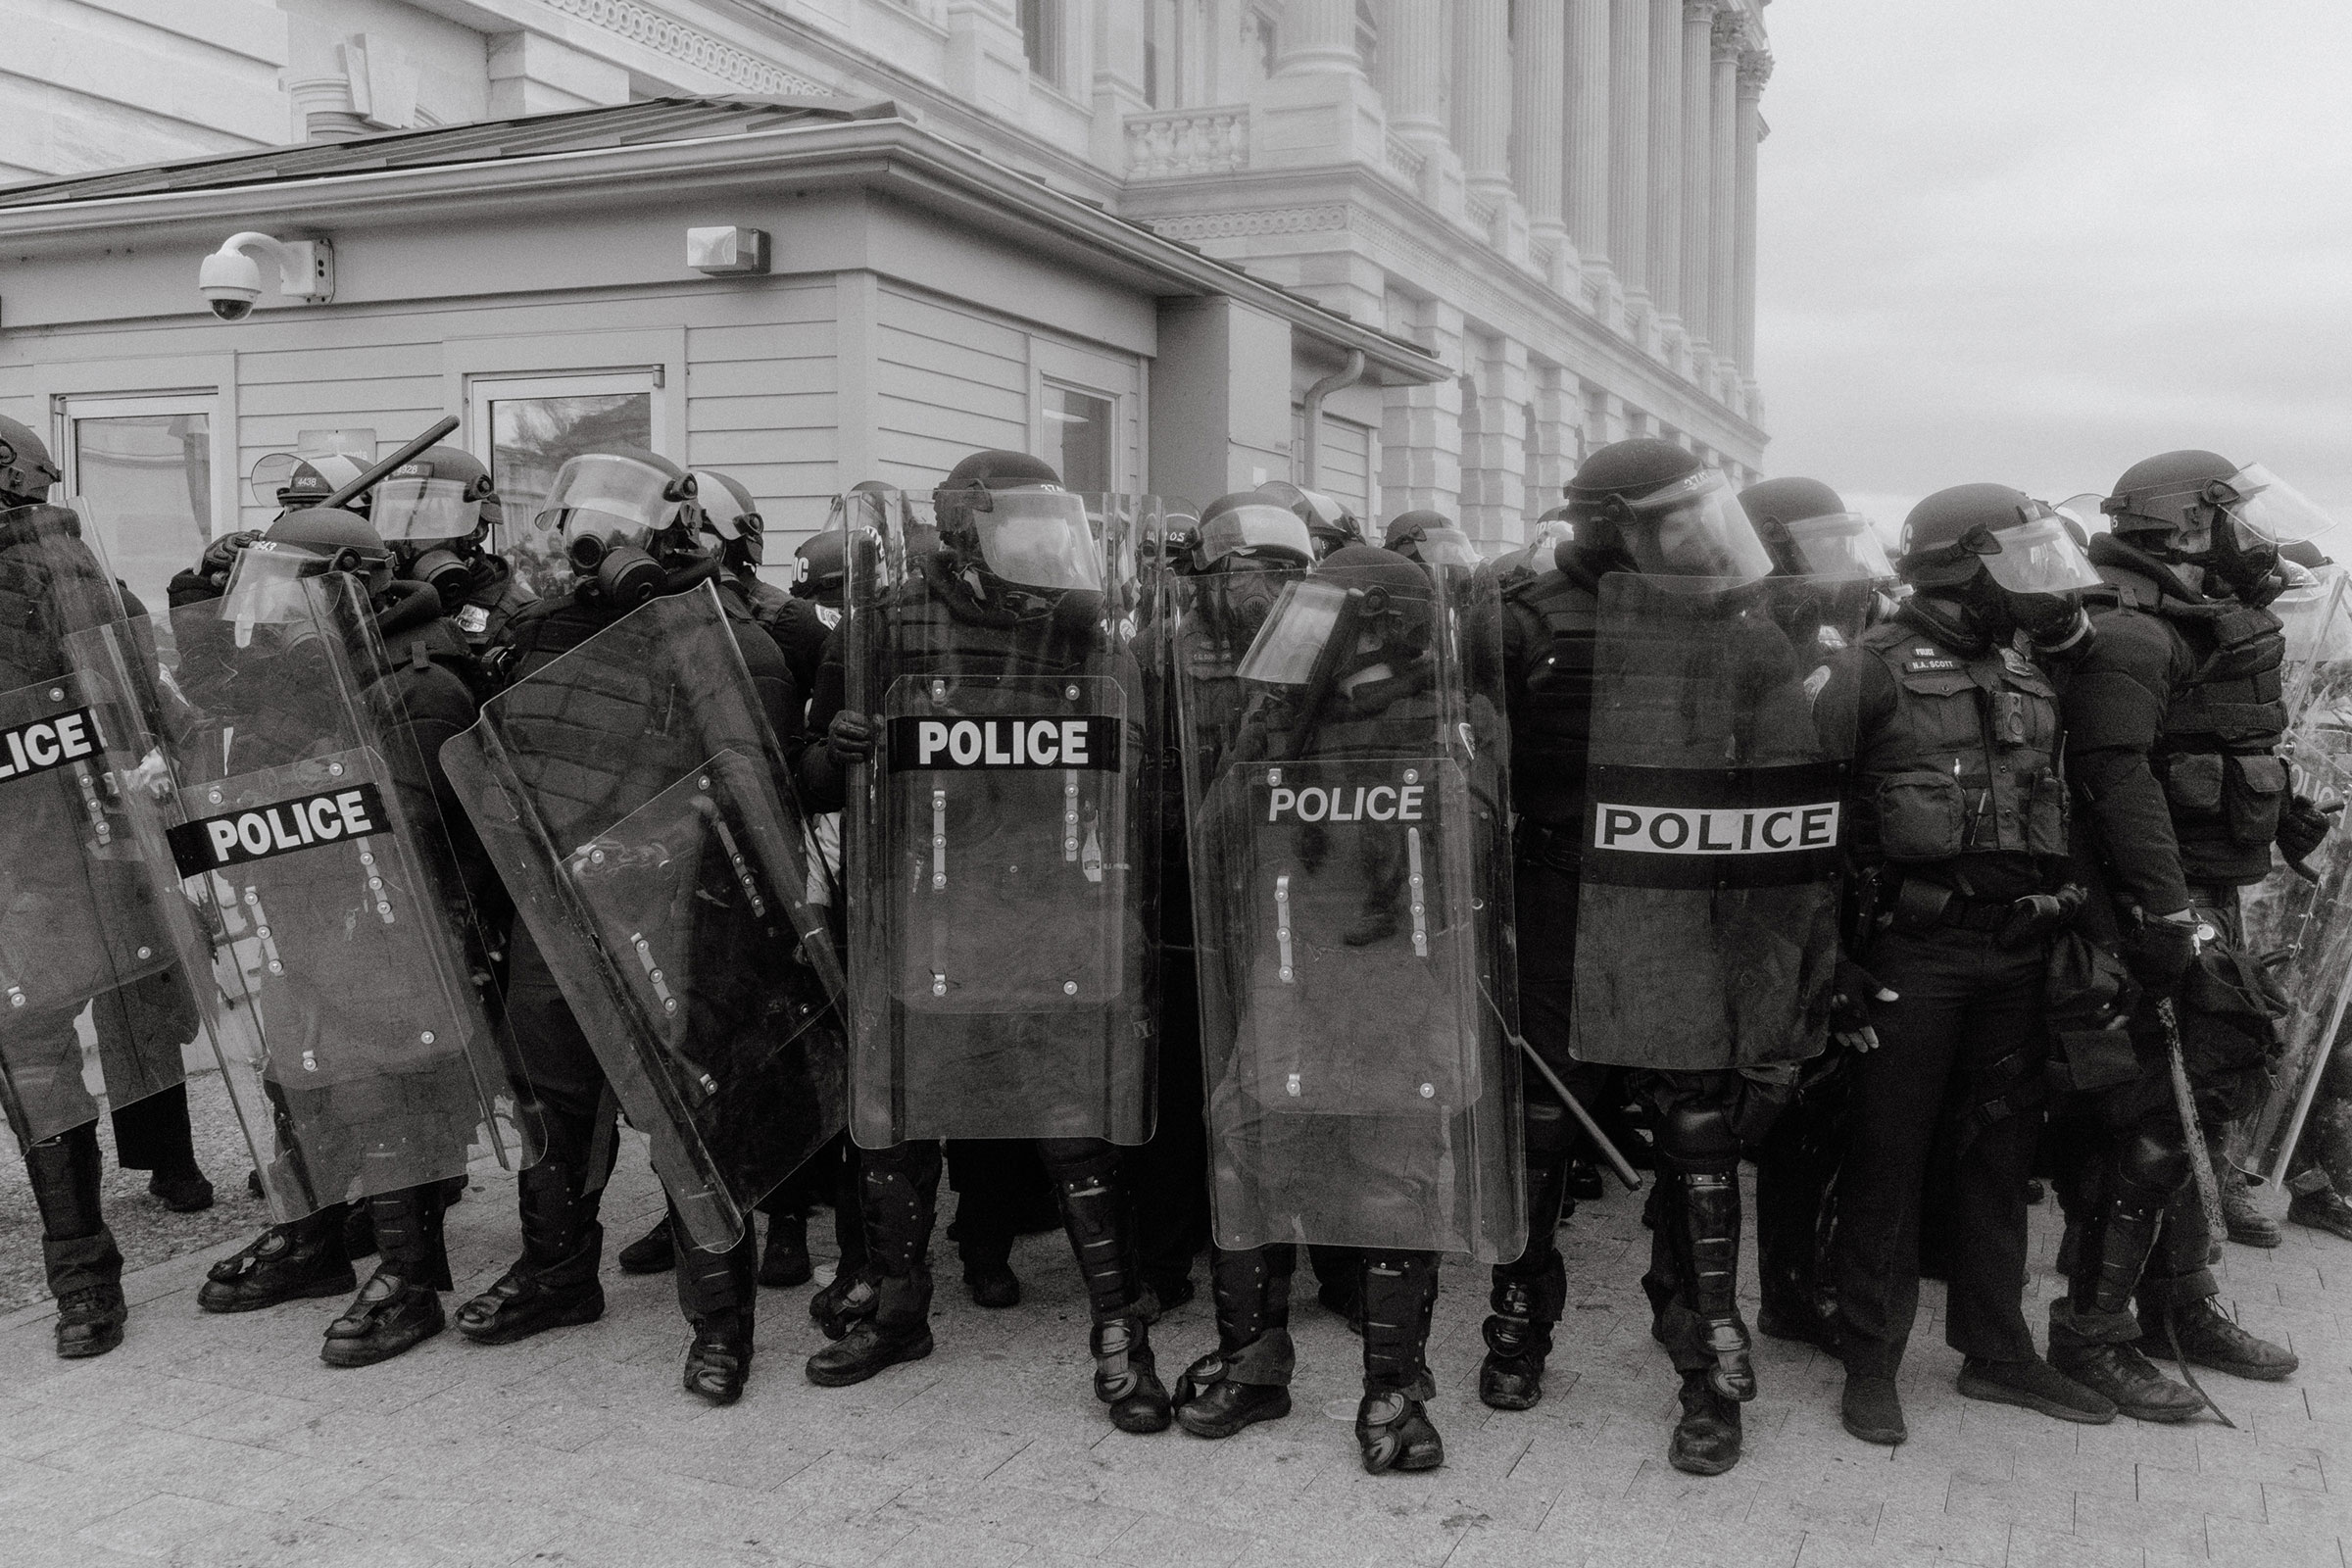 Capitol Police gathered outside the Capitol. (Christopher Lee for TIME)